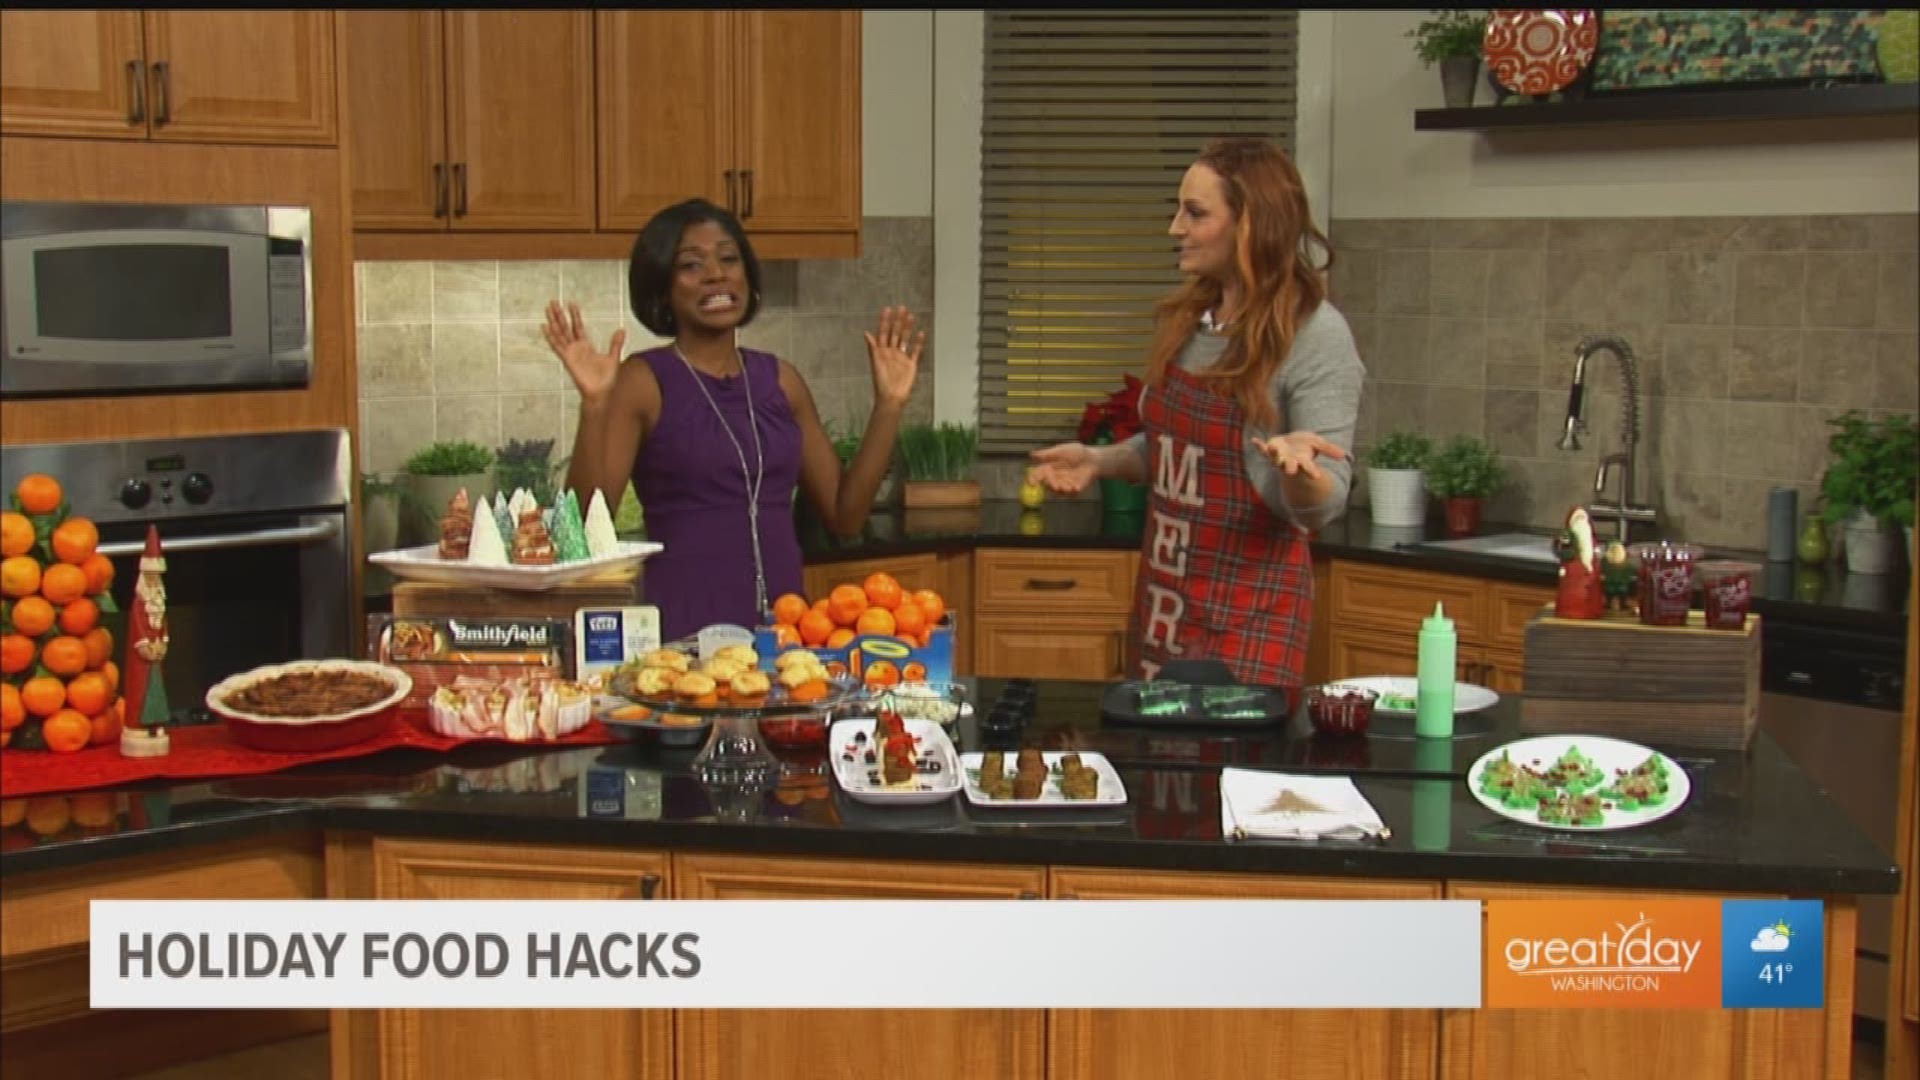 Food & Lifestyle expert Parker Wallace shows a few food hacks that you can enjoy with your family this holiday season.